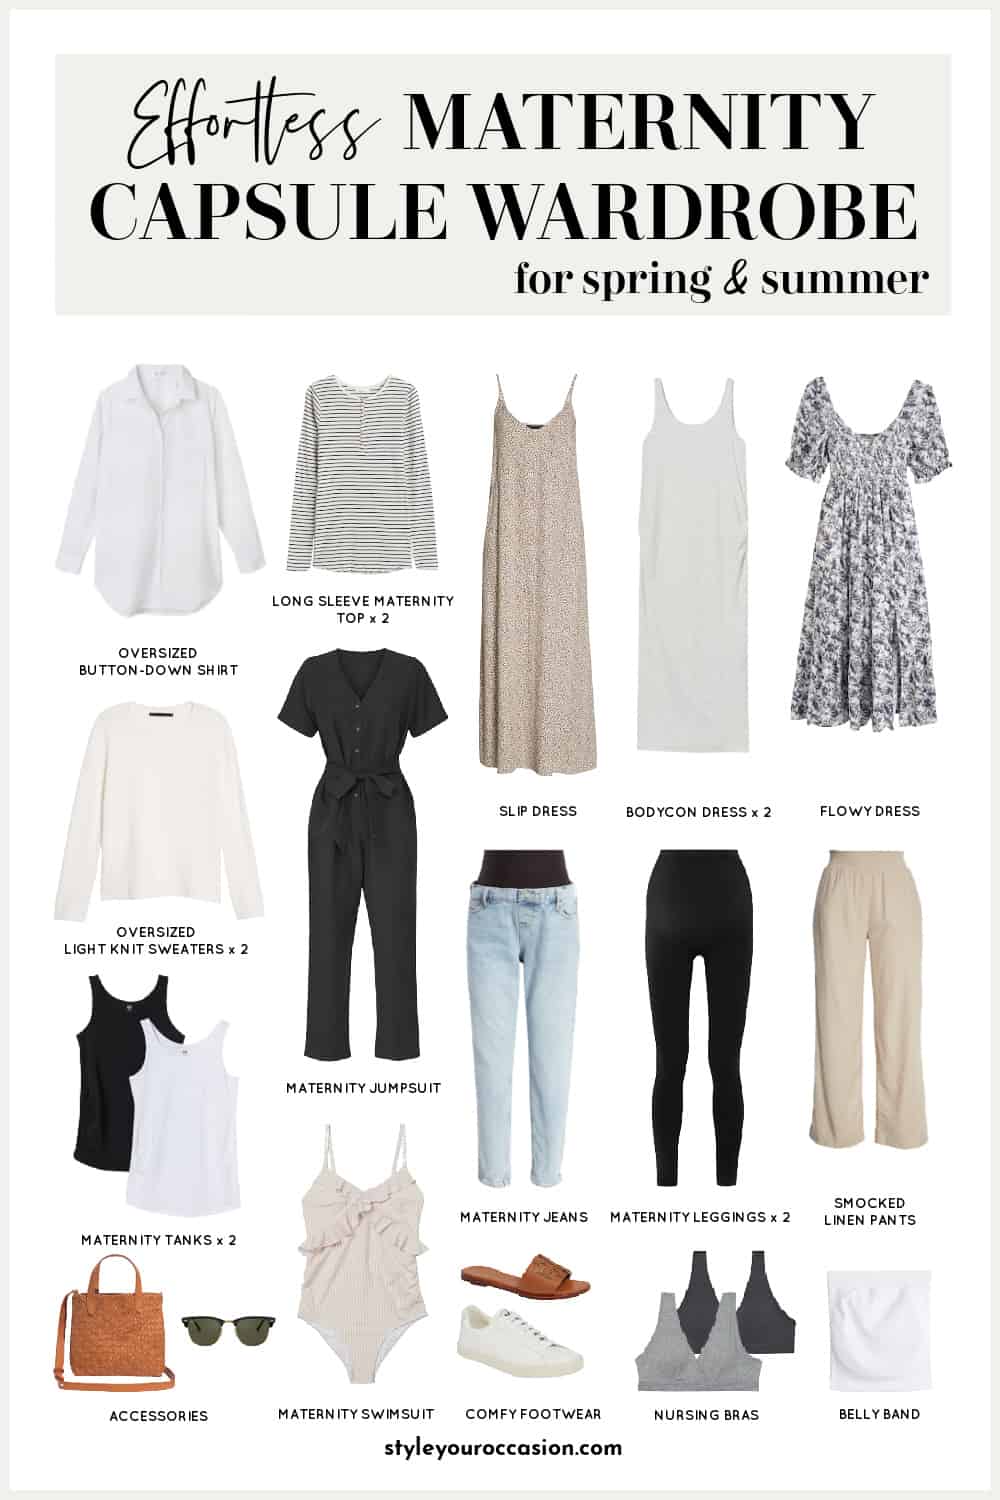 Pinterest collage of a maternity capsule wardrobe for summer and spring with neutral clothing items, shoes, and accessories